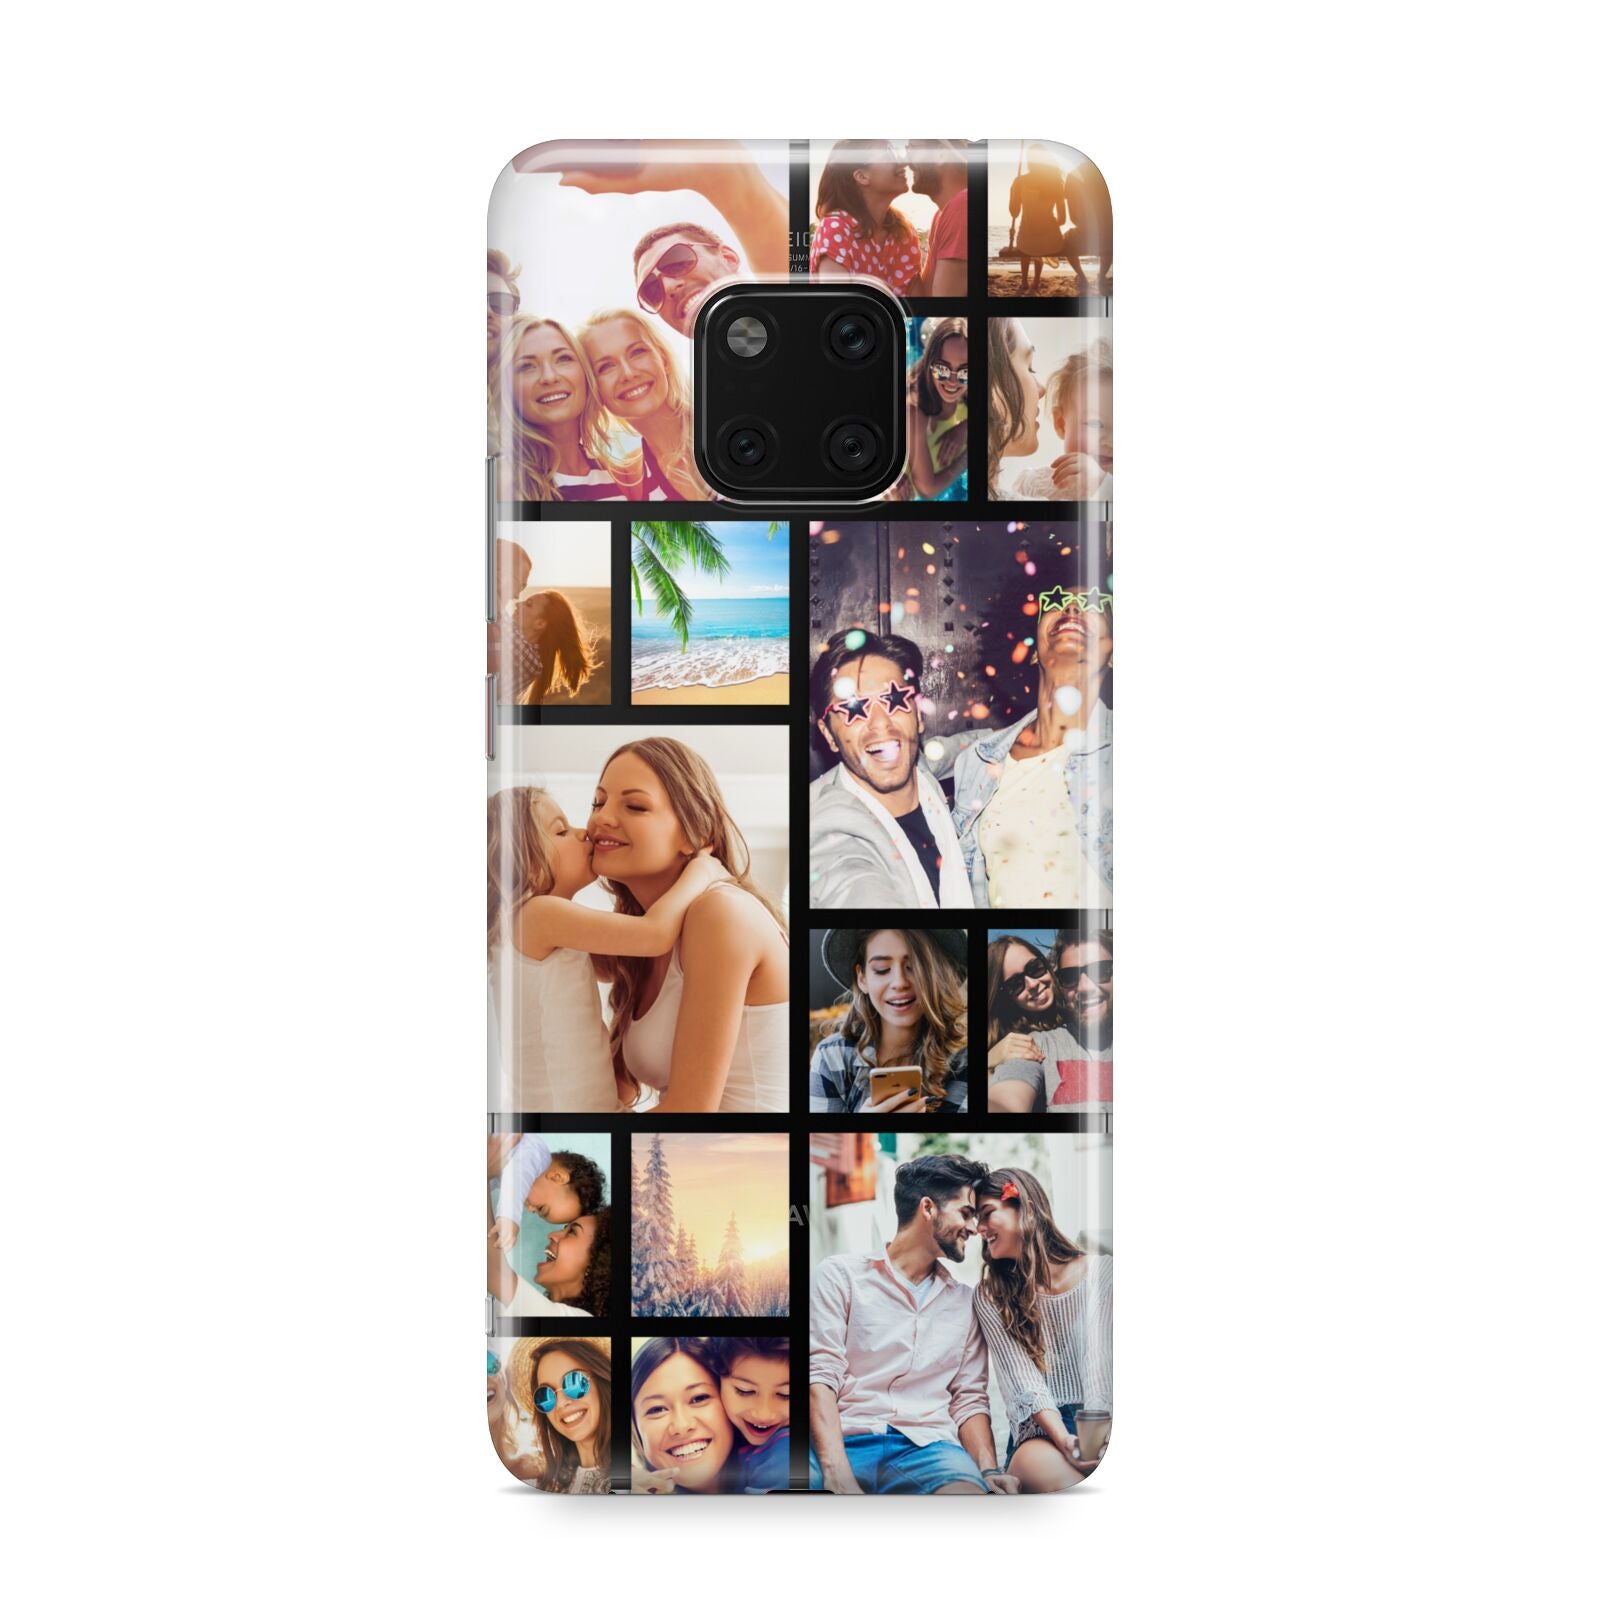 Abstract Multi Tile Photo Montage Upload Huawei Mate 20 Pro Phone Case